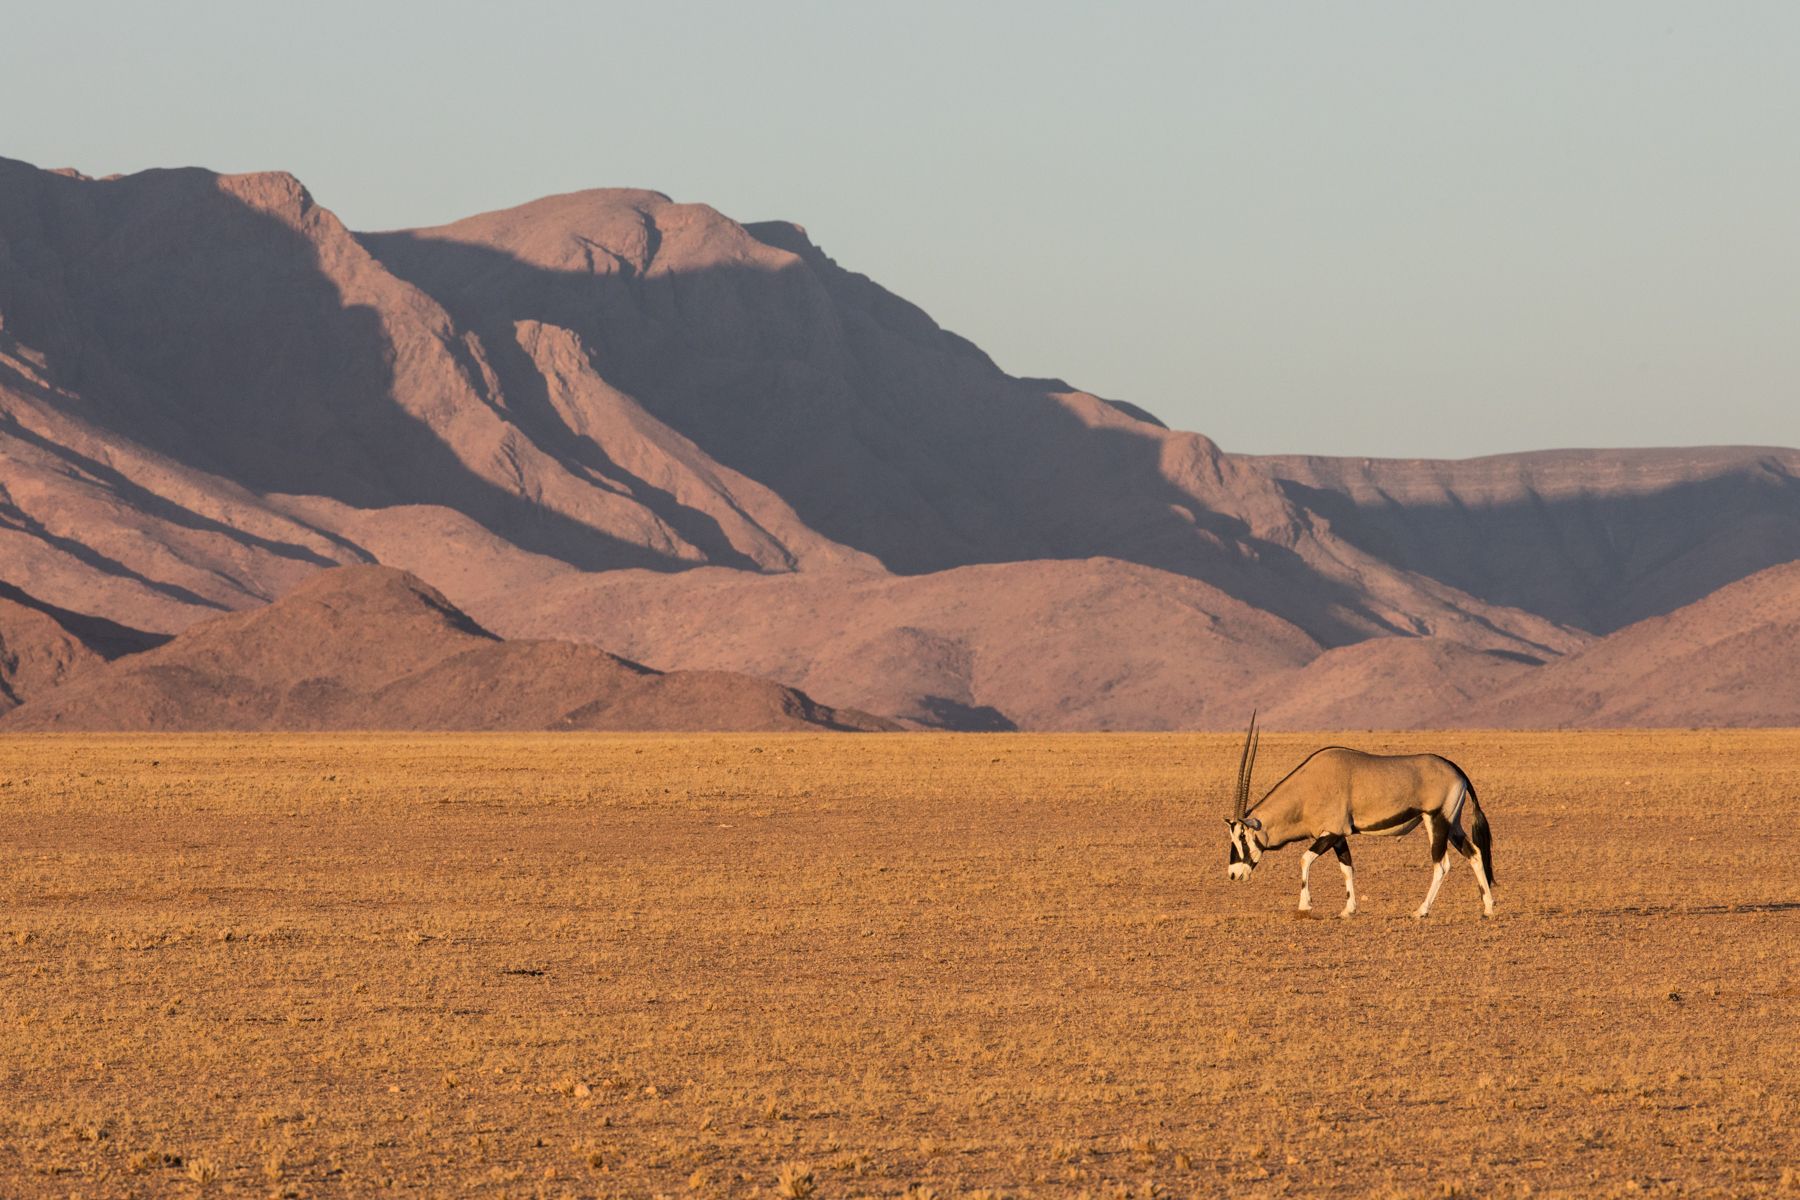 An Oryx wanders the plains at the start of Sossusvlei on our Namibia wildlife photography tour